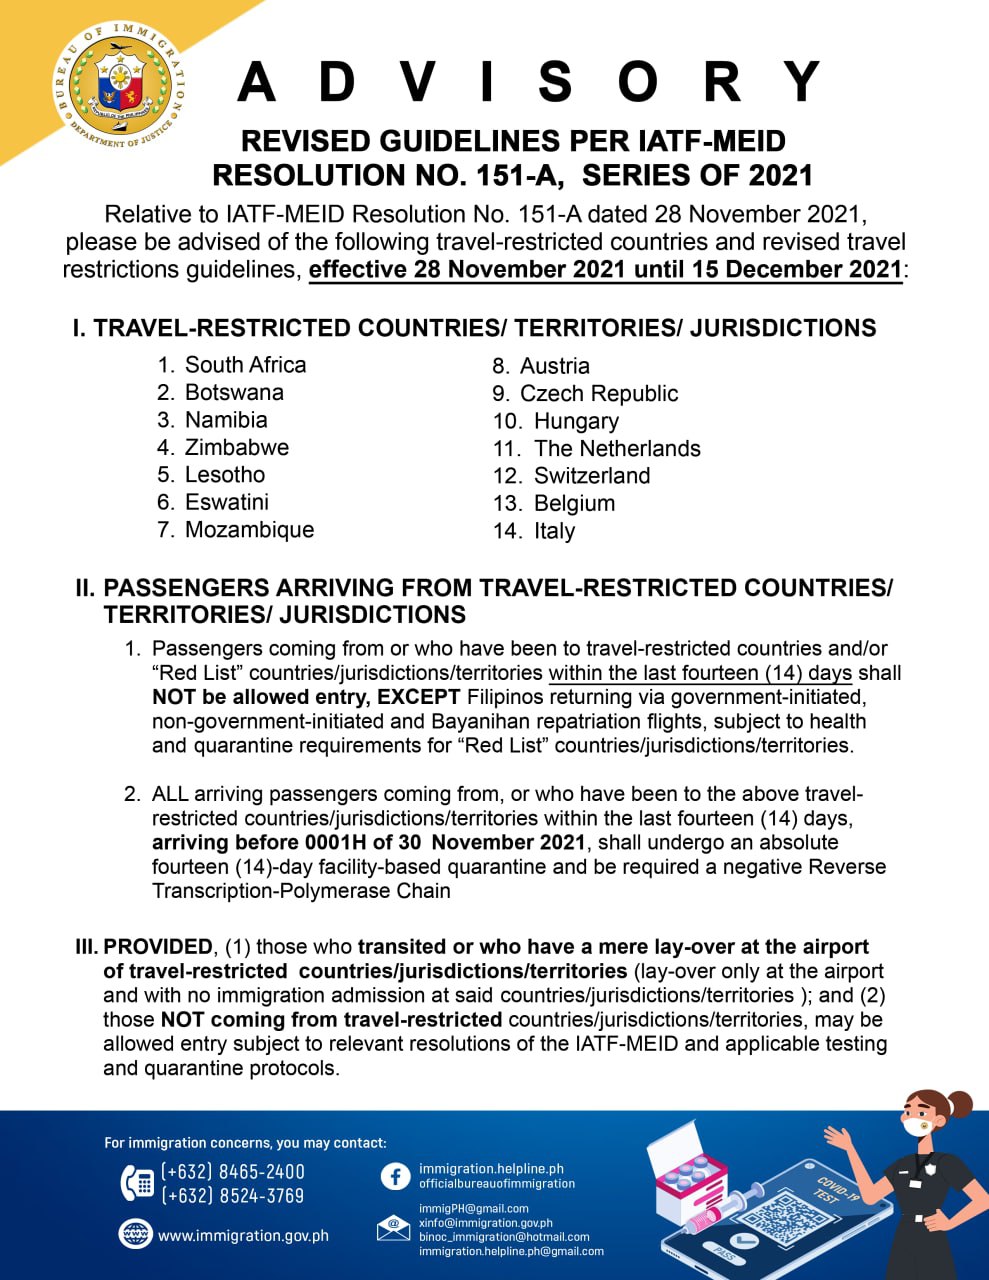 foreign office travel guidelines